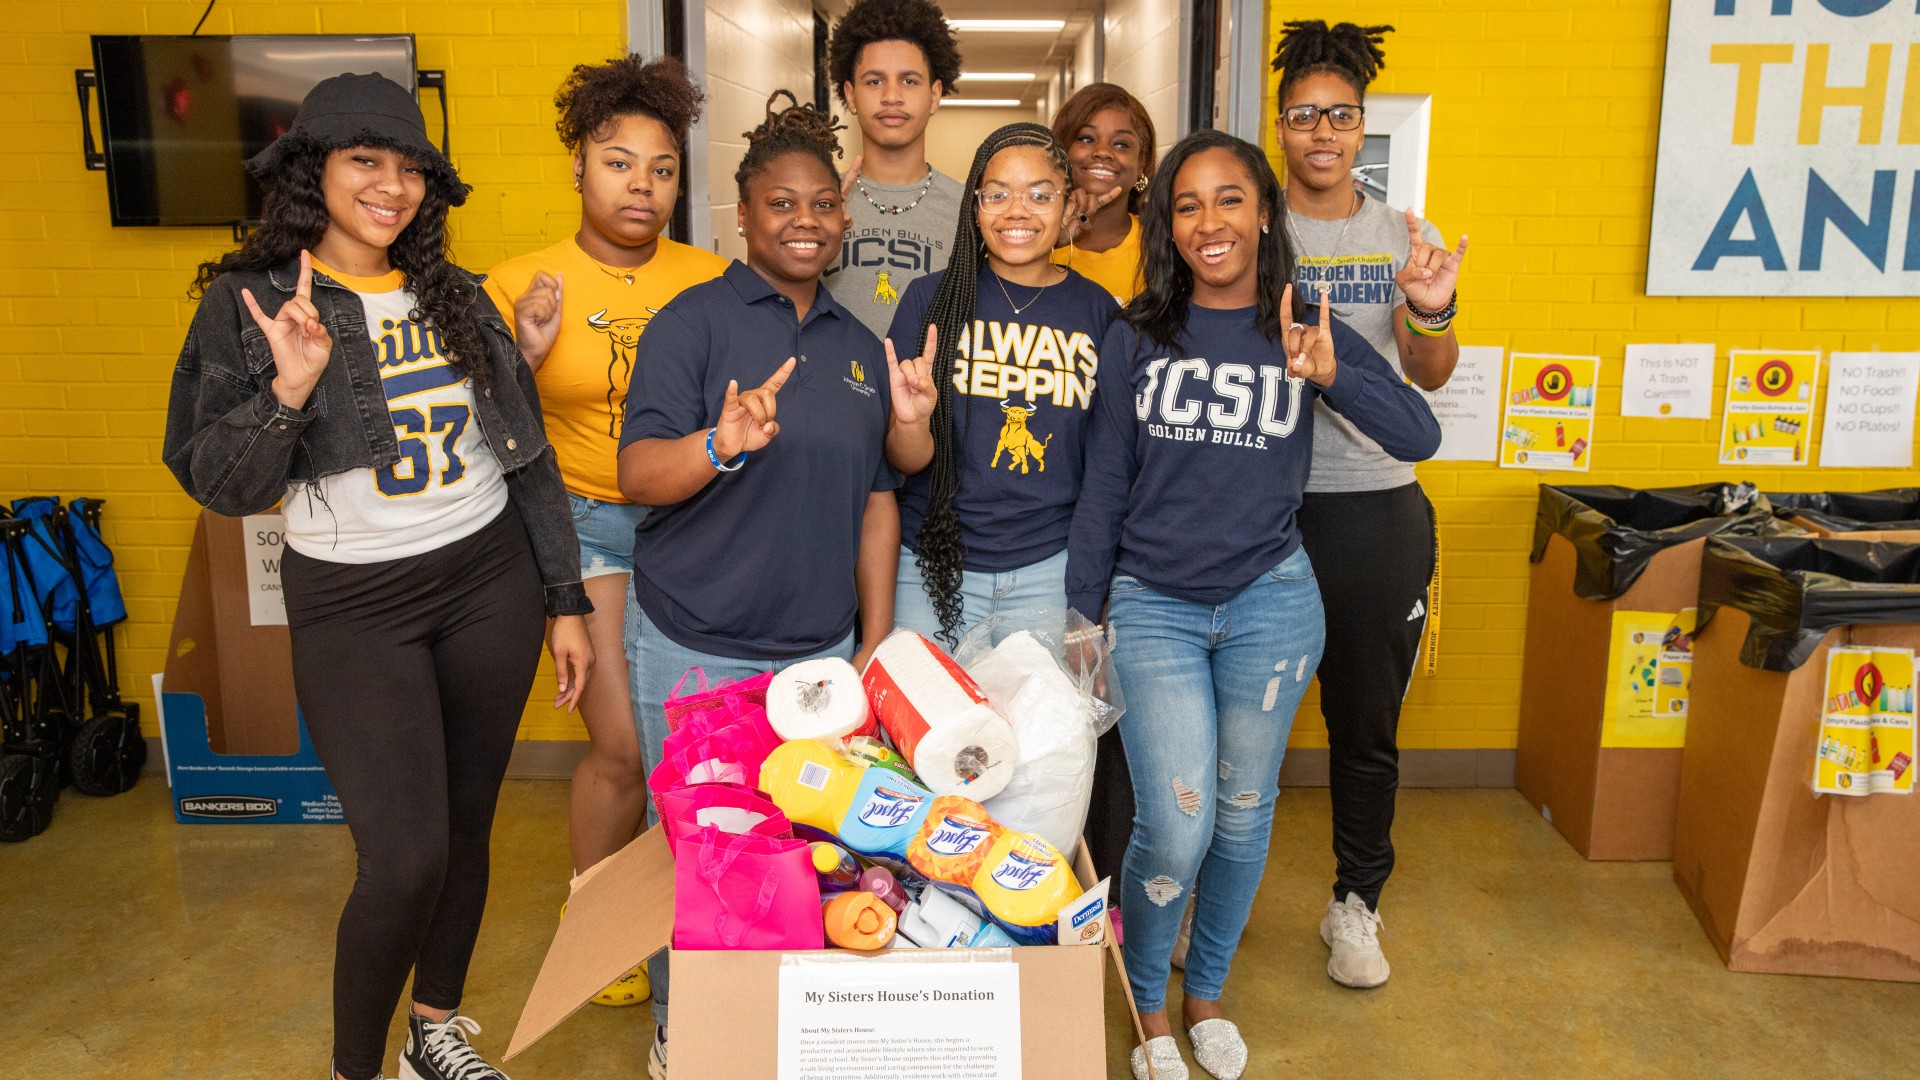 The JCSU UNCF Pre-Alumni Council collected donations for My Sister's House